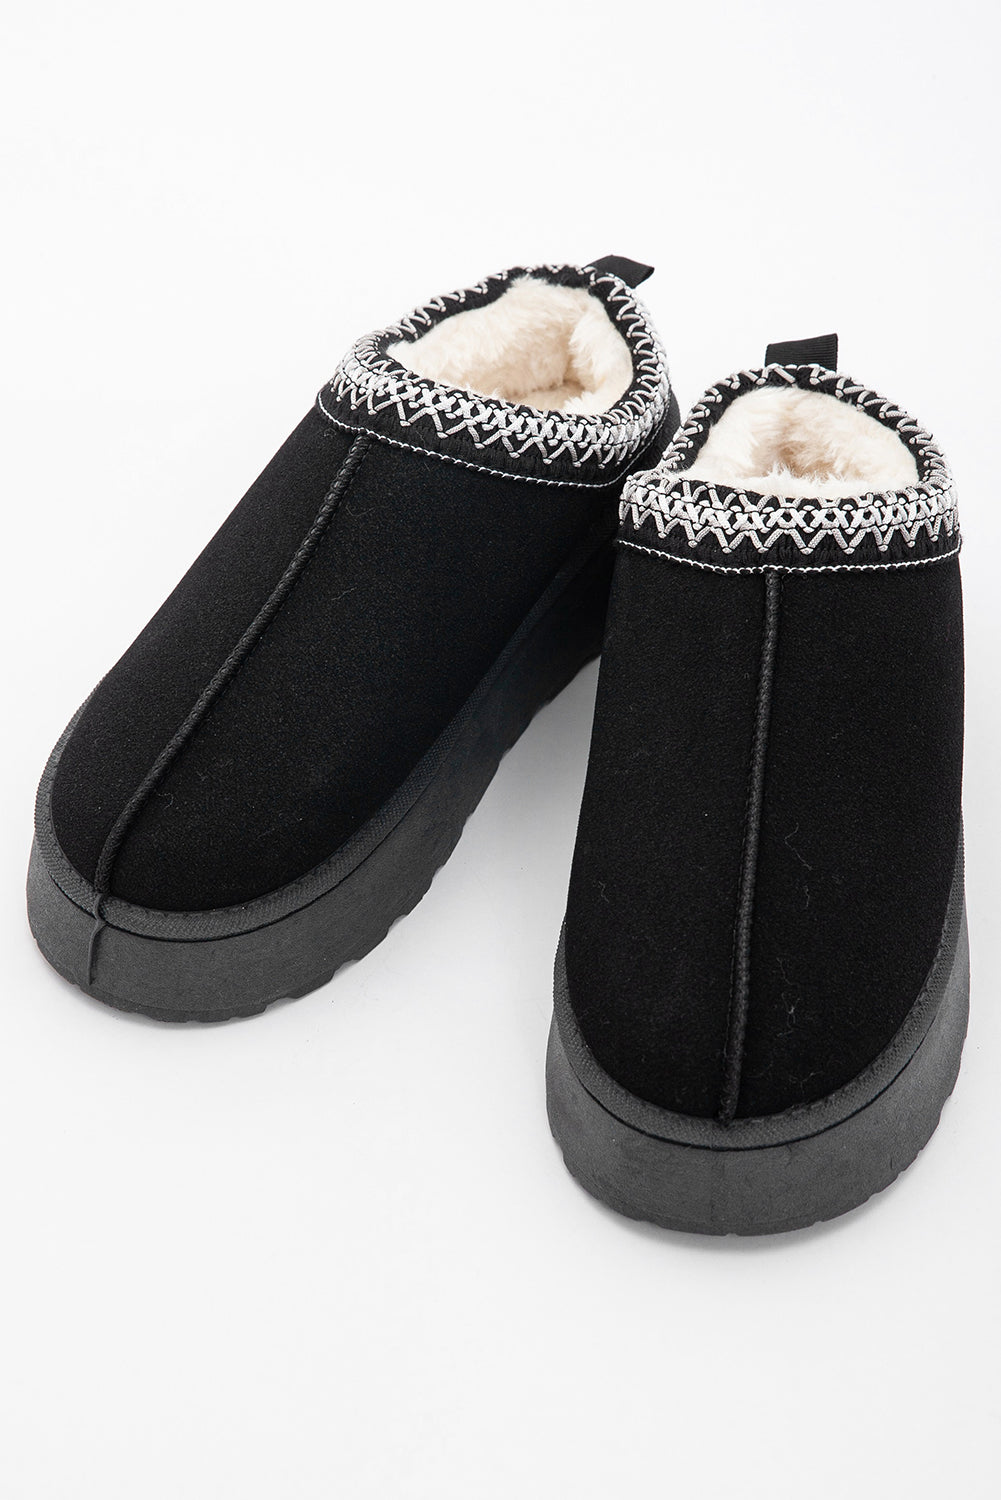 Black Suede Contrast Print Plush Lined Snow Boots